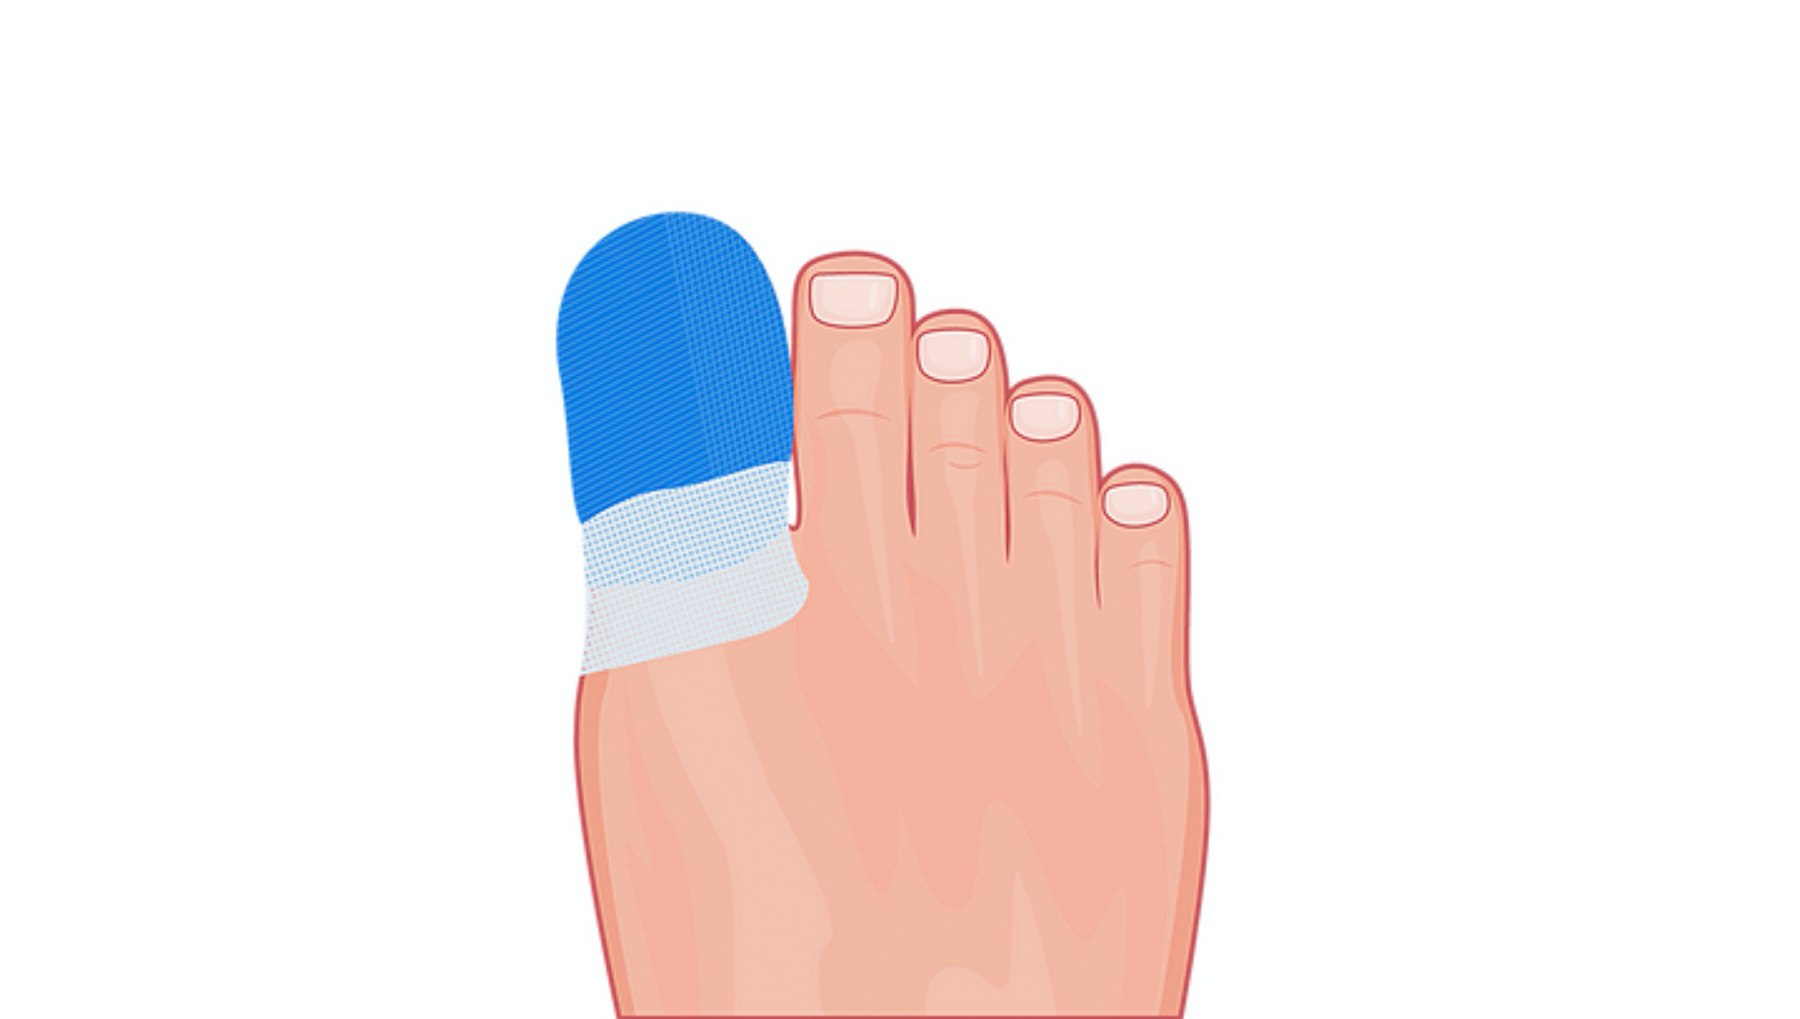 Ingrown Nail Surgery in Penrith, Ryde and other areas